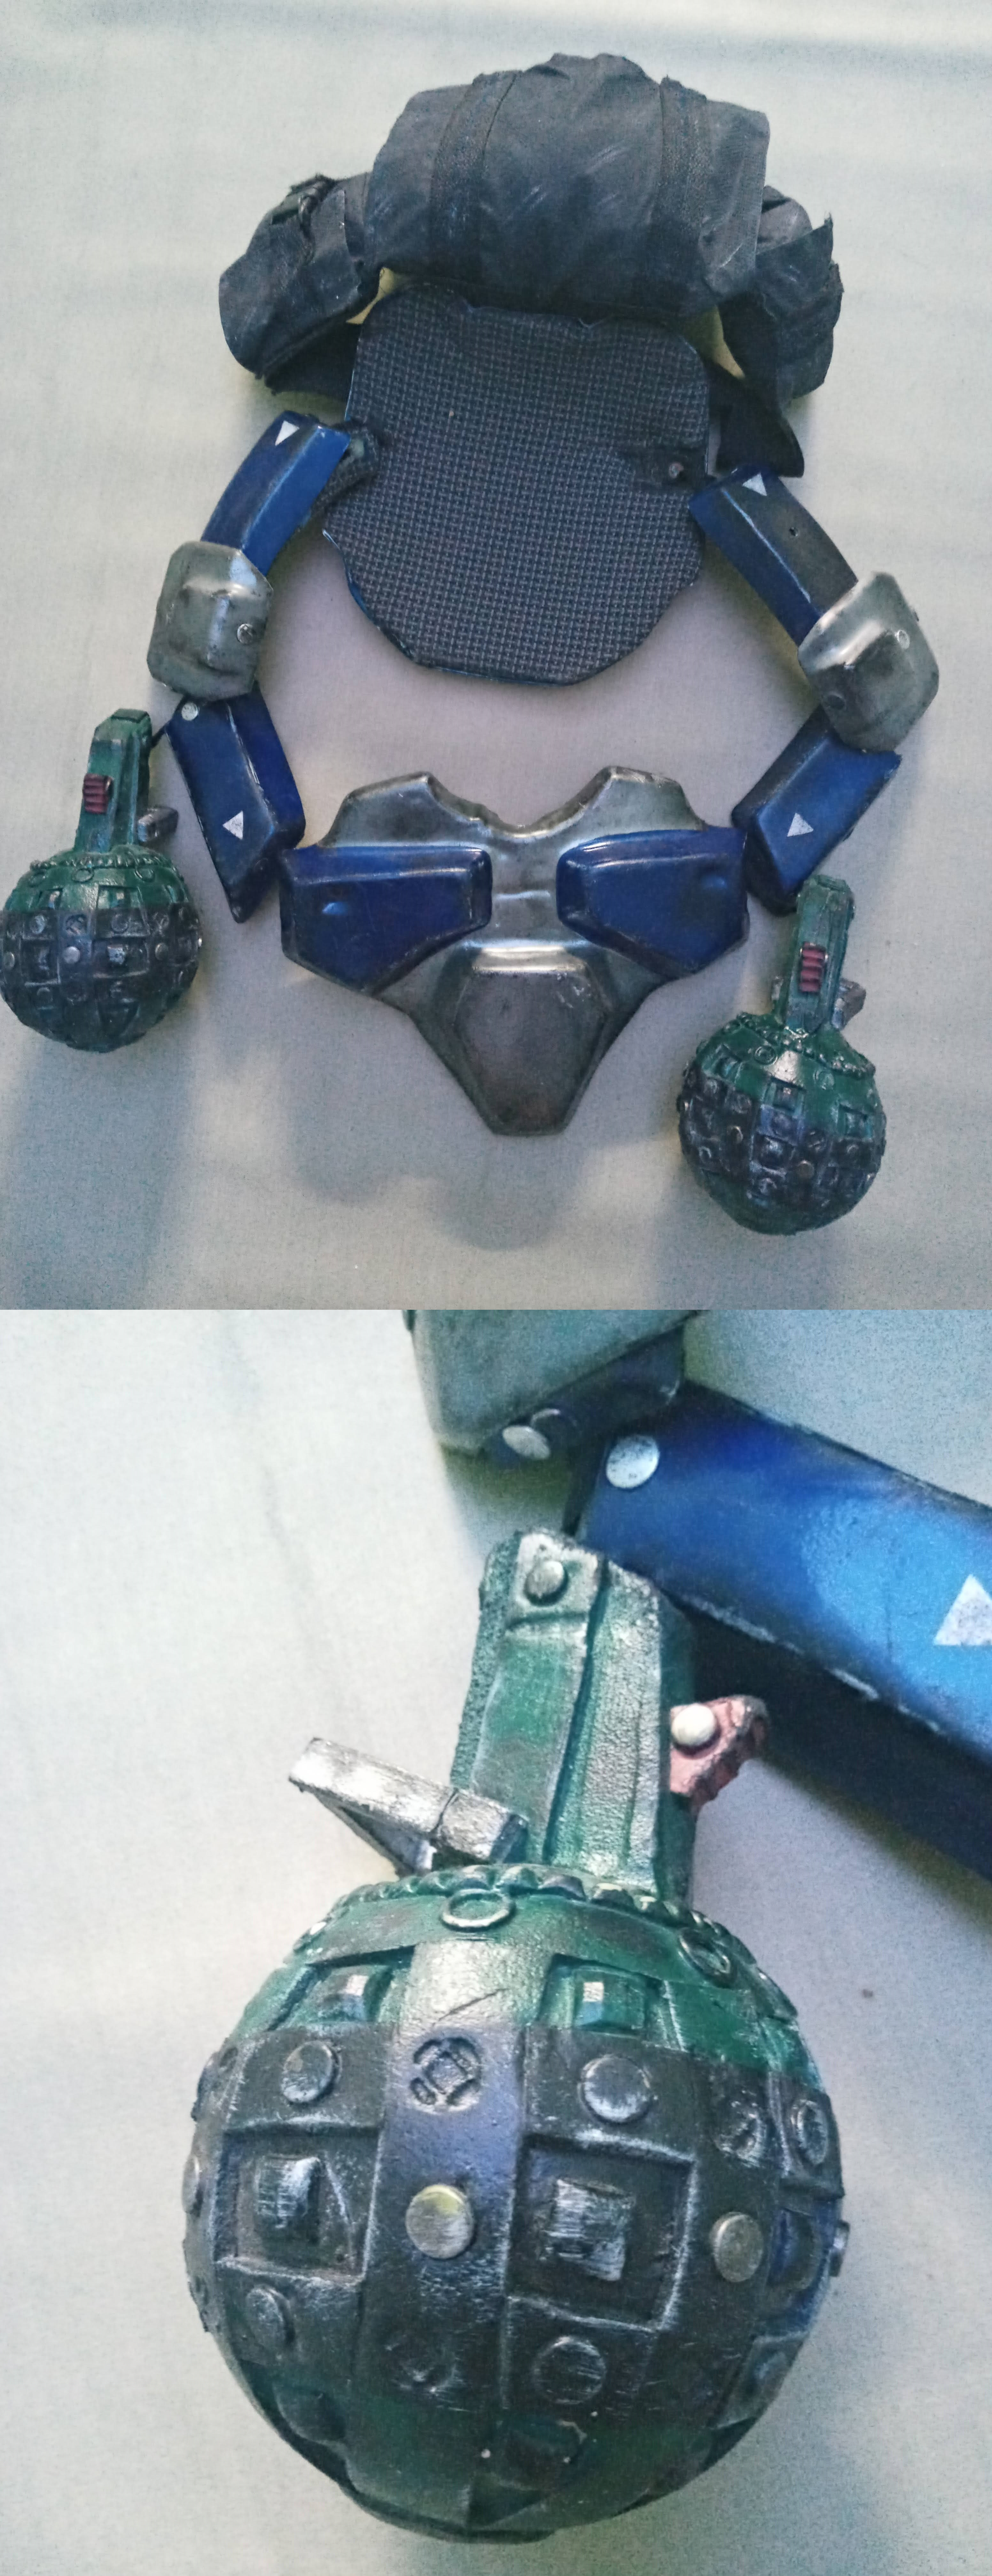 Parts of powered armor